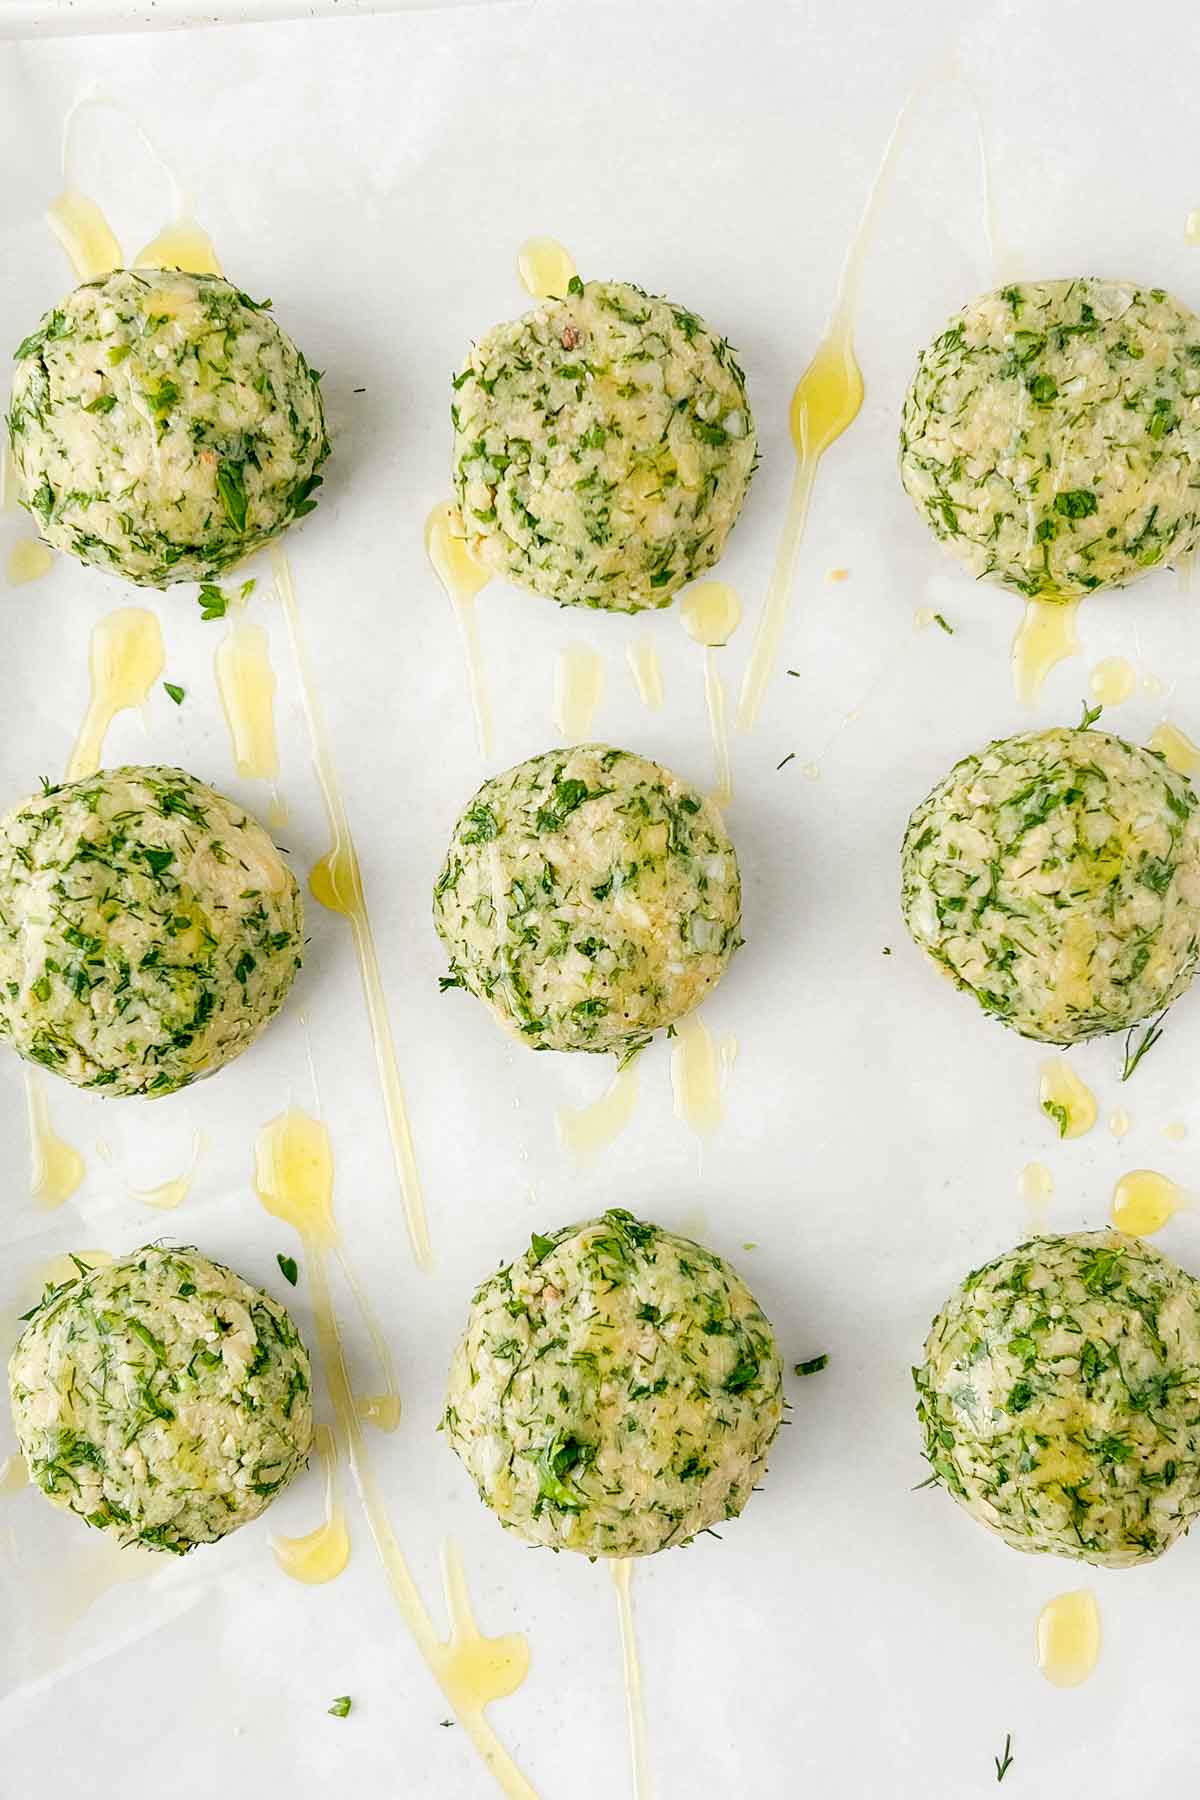 formed falafel balls on parchment lined sheet pan drizzled with olive oil before baking.